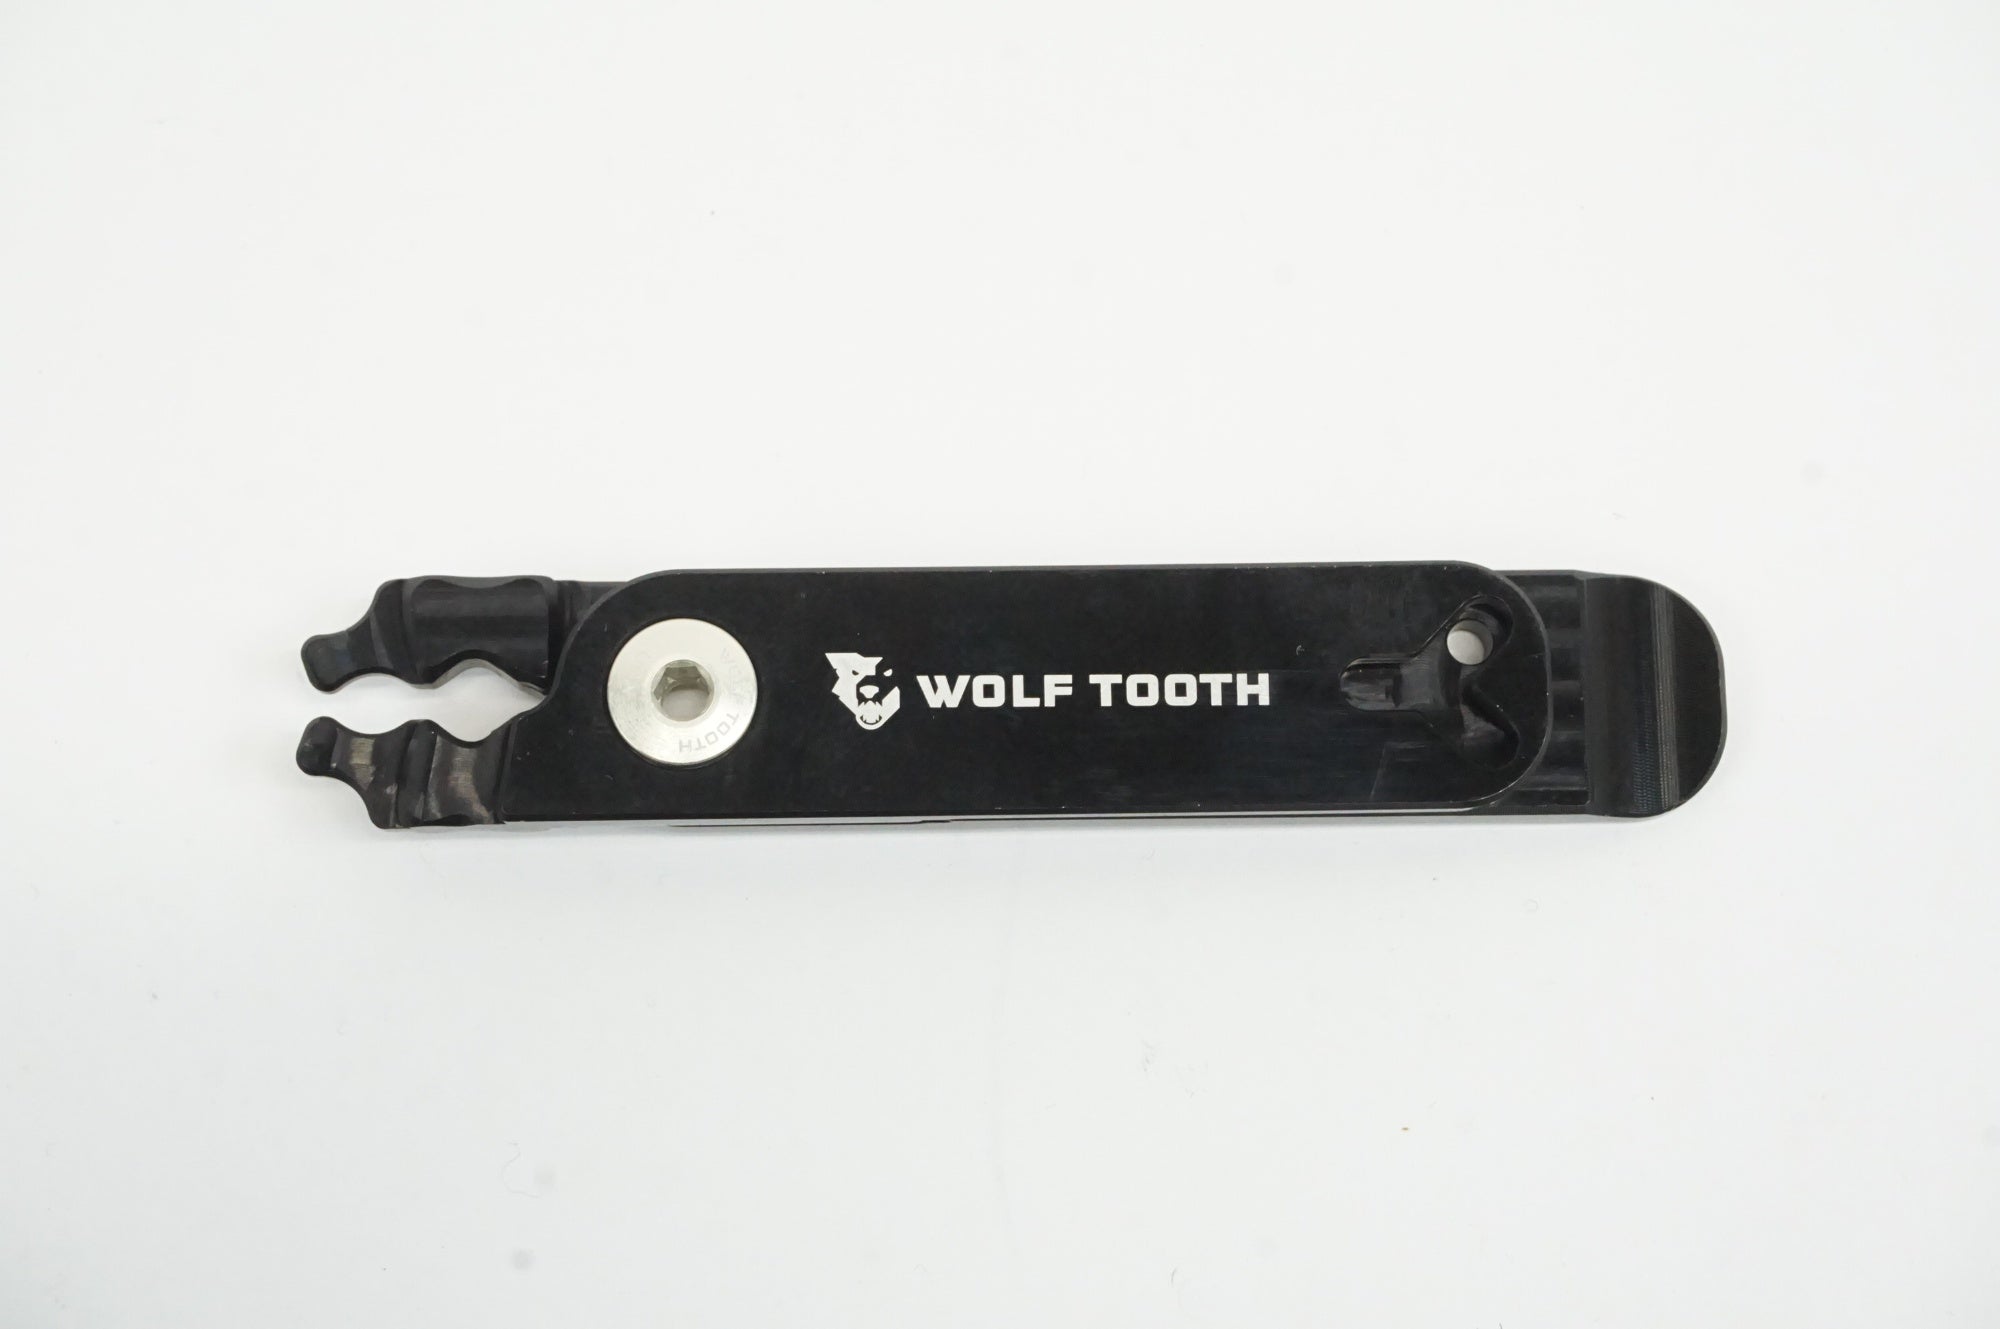 WOLF TOOTH 「ウルフトゥース」 MASTER LINK COMBO PLIERS チェーン工具 / 宇都宮店